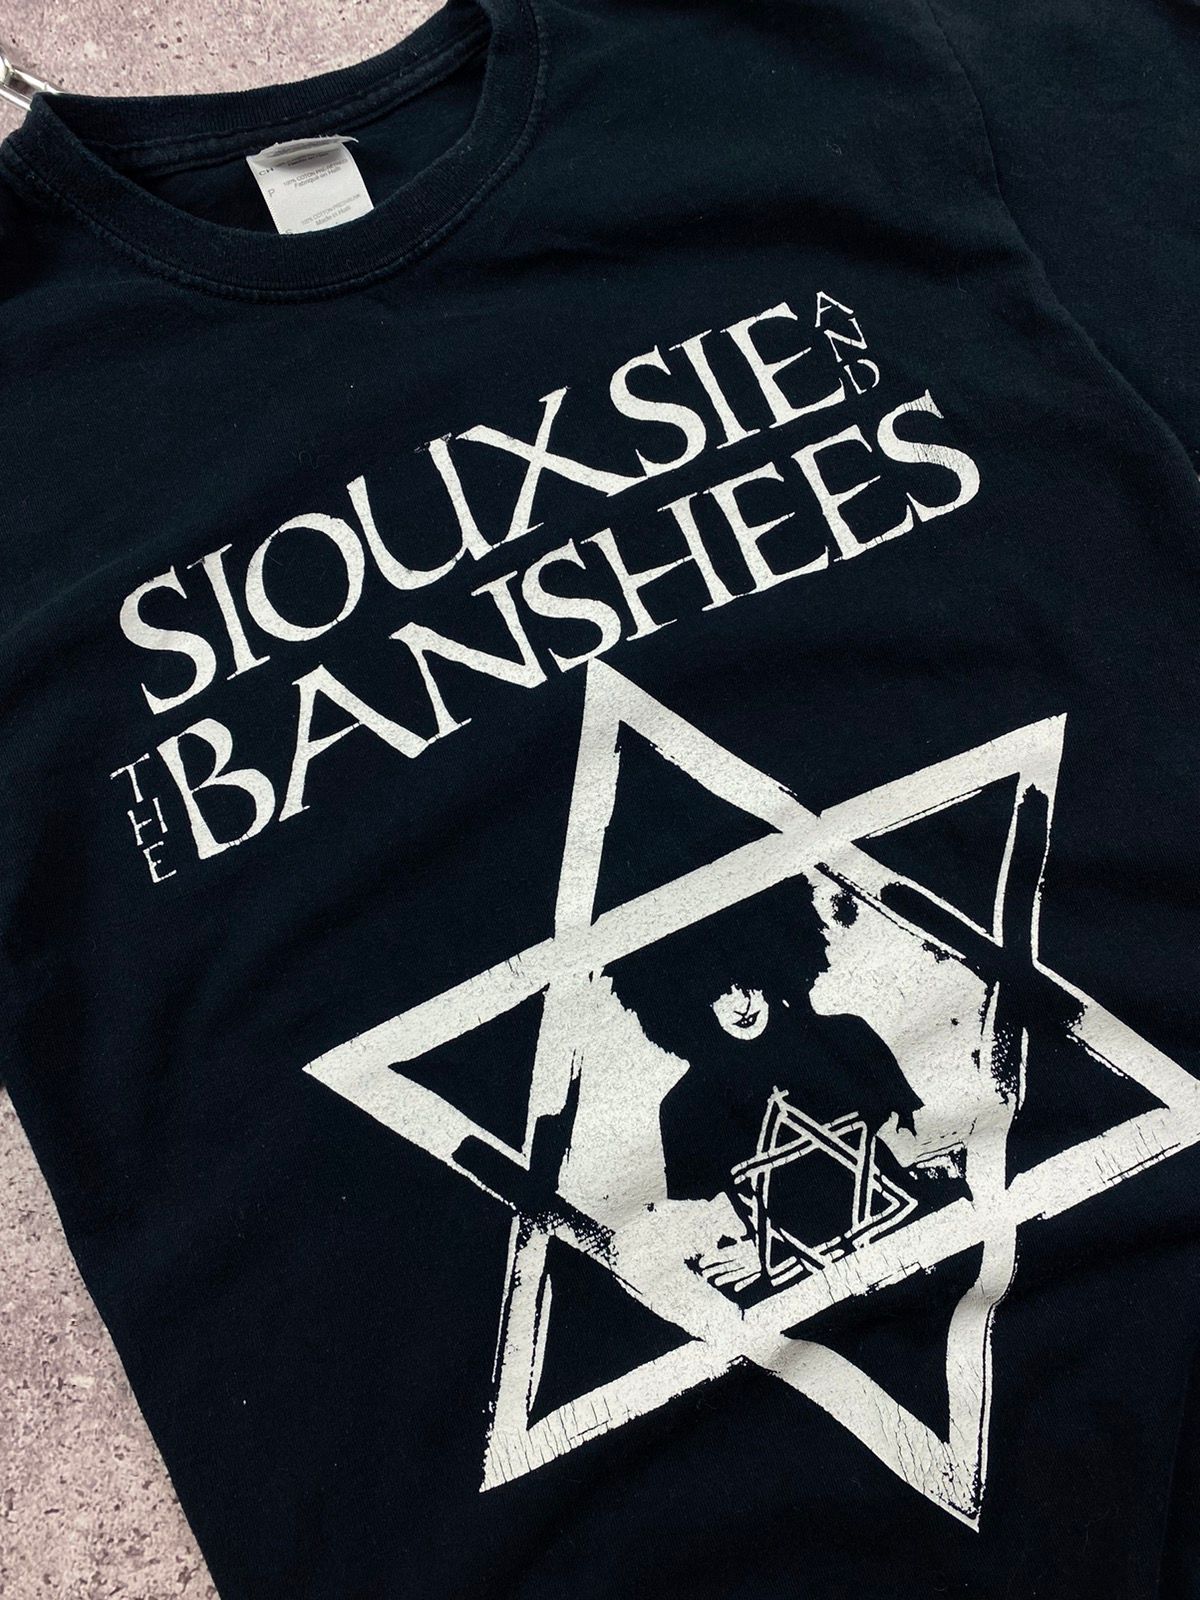 Vintage Vintage Siouxsie And The Banshees Tee Shirt Punk Faded Size US S / EU 44-46 / 1 - 4 Thumbnail